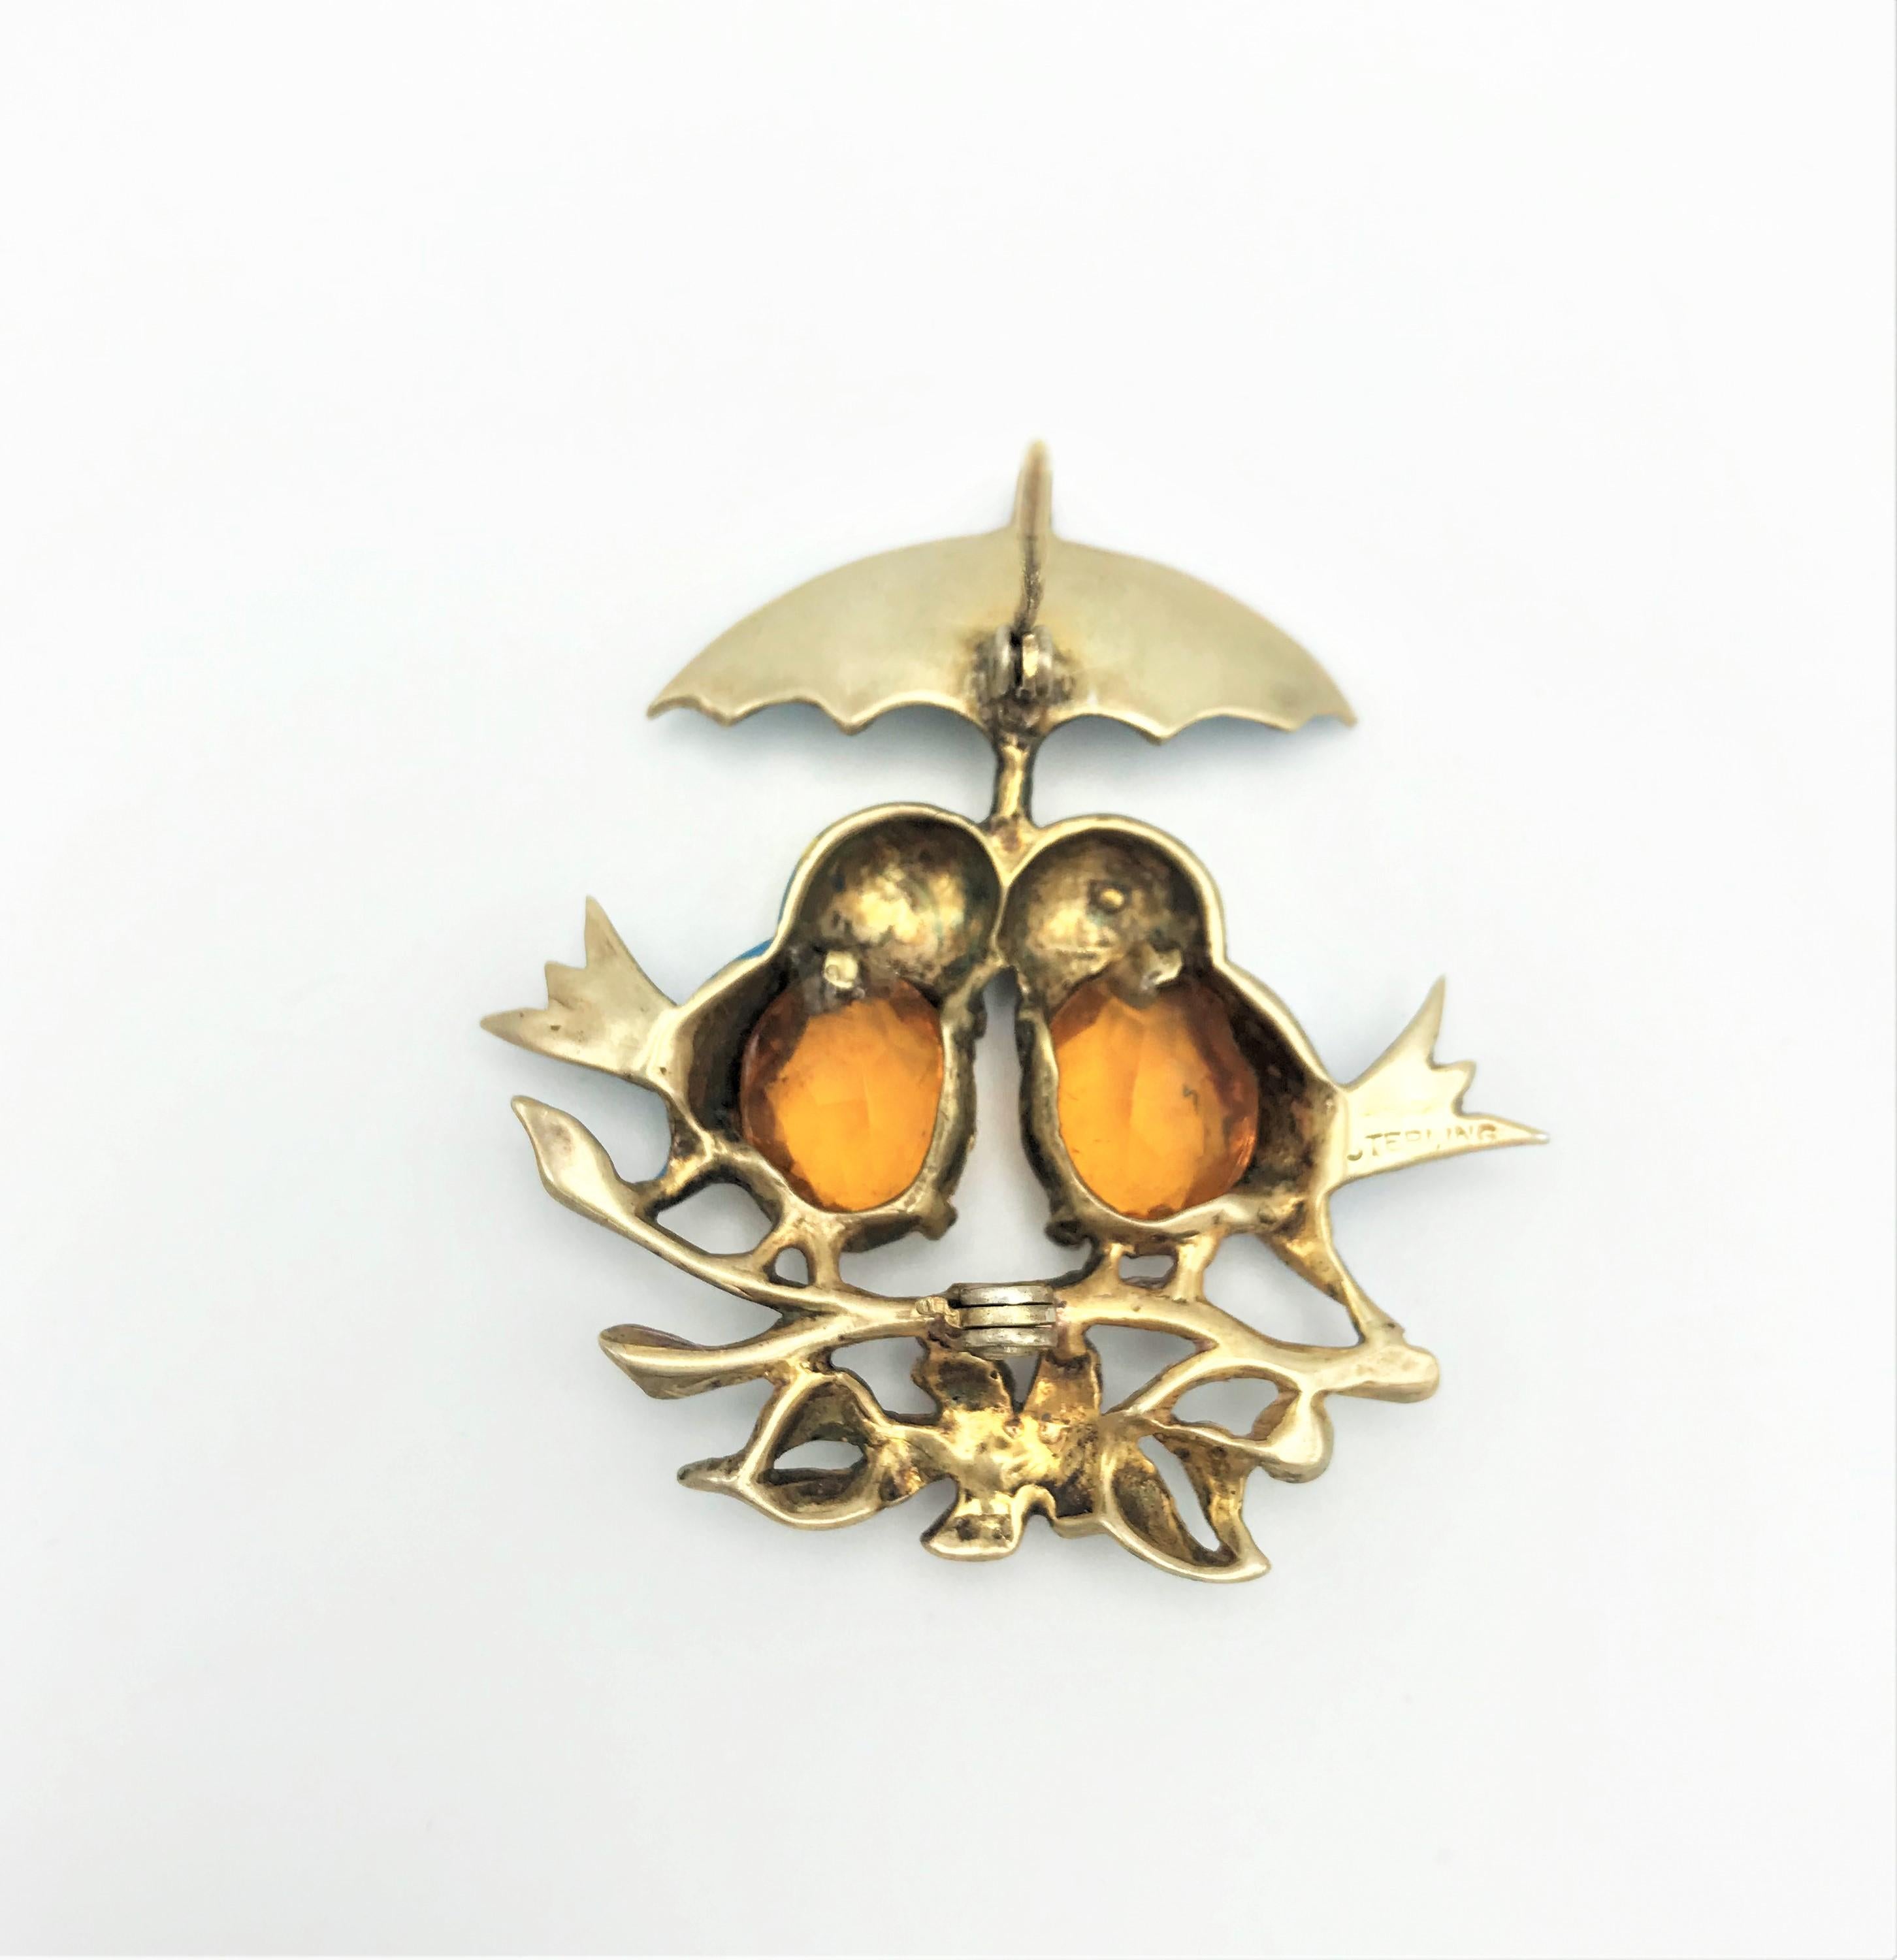 Baguette Cut Bird brooch with 2 cut rhinestones as the belly's sterling/gold plated 1940s USA